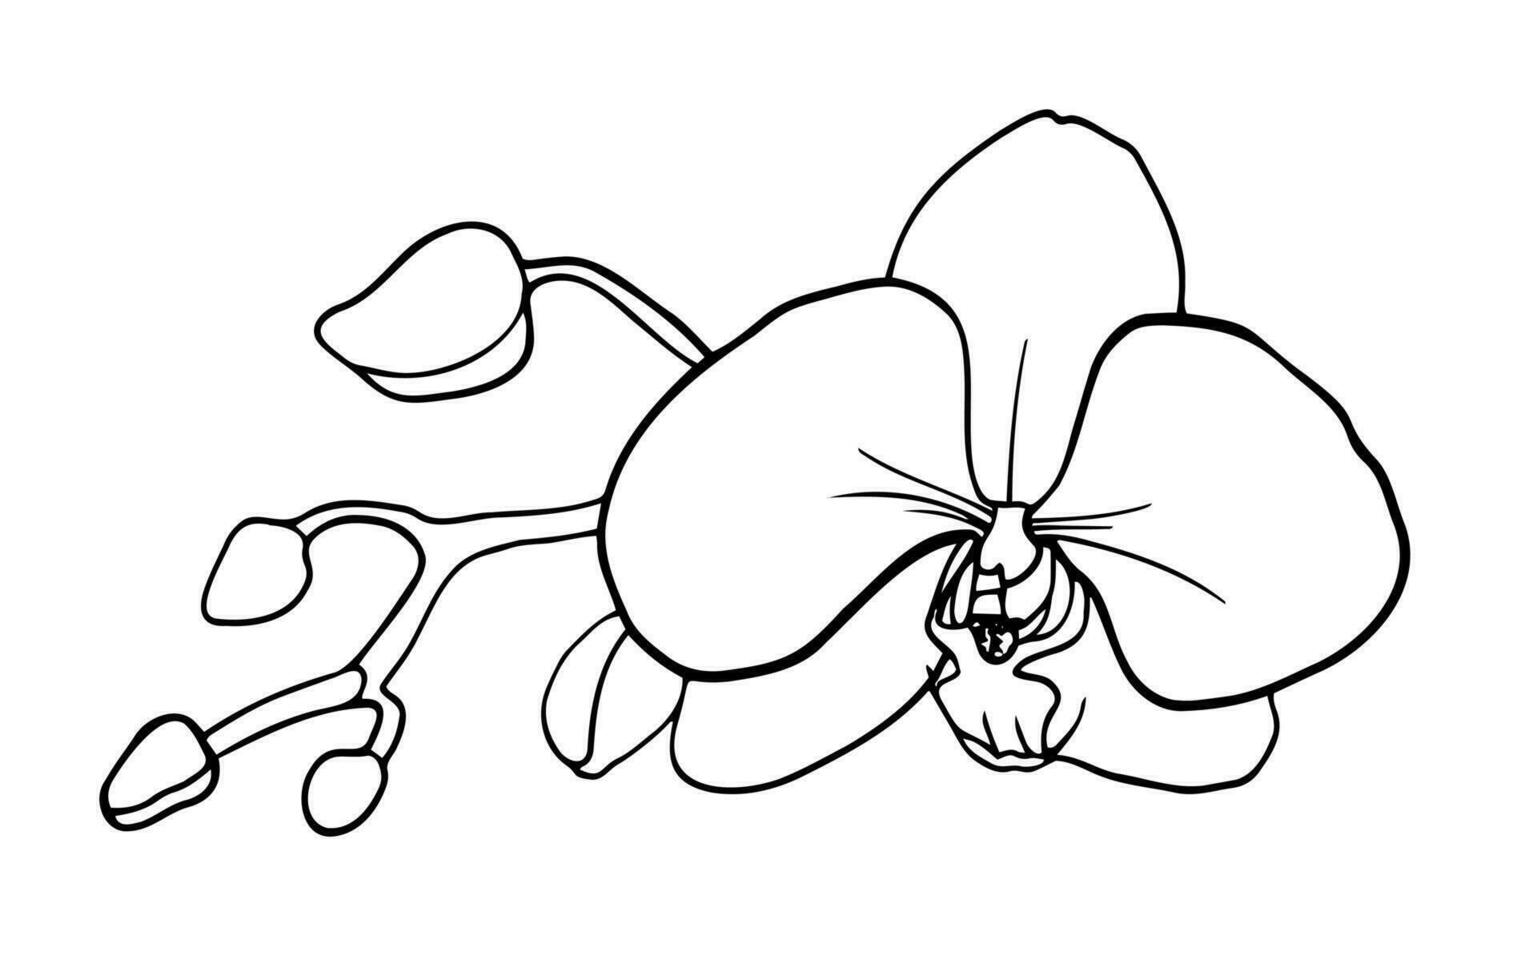 Orchid flowers, outline vector illustration